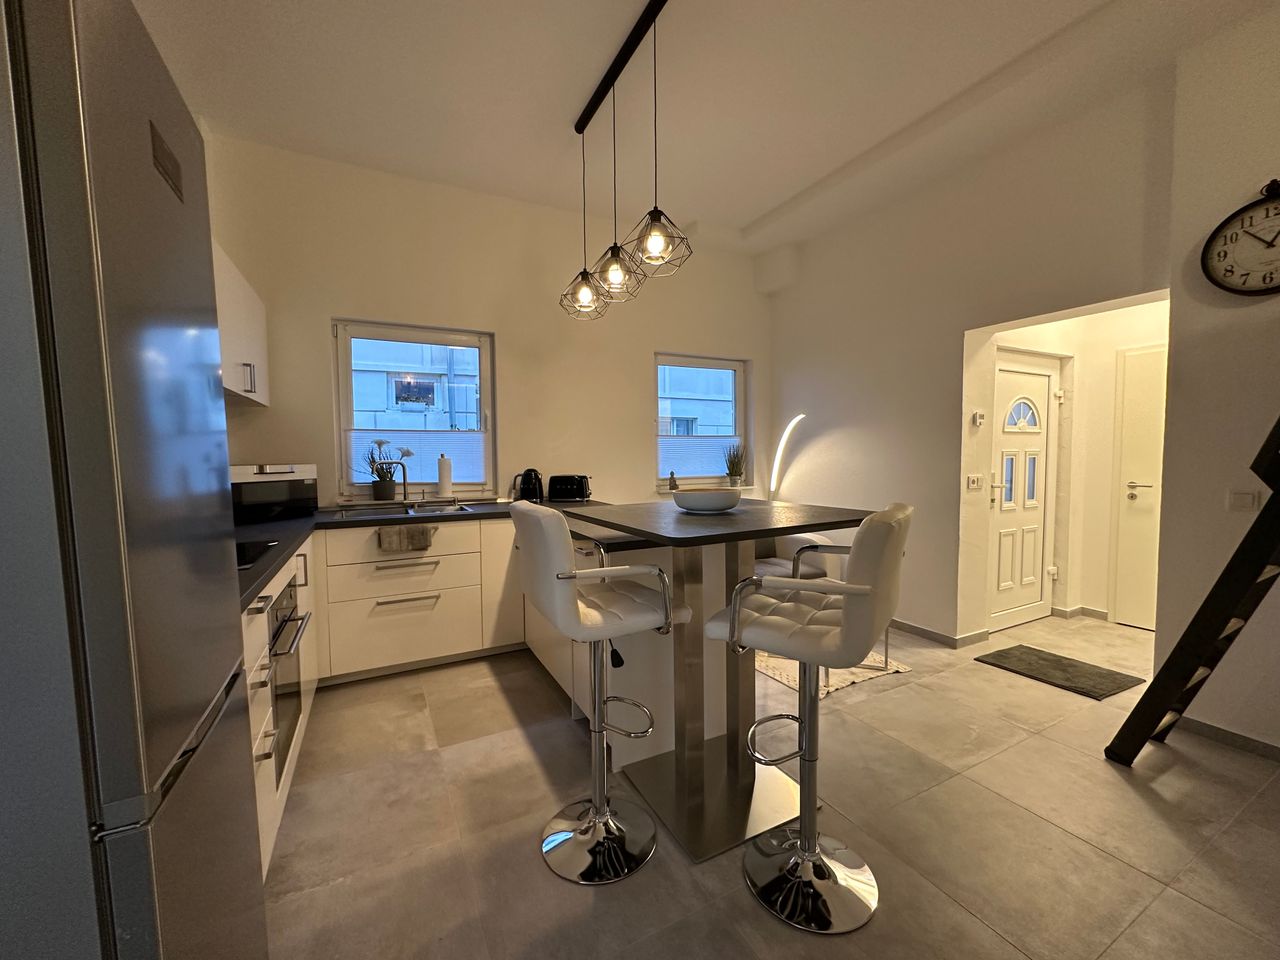 Dreamlike 2.5 room apartment with terrace in central natural location of the old town Köpenick